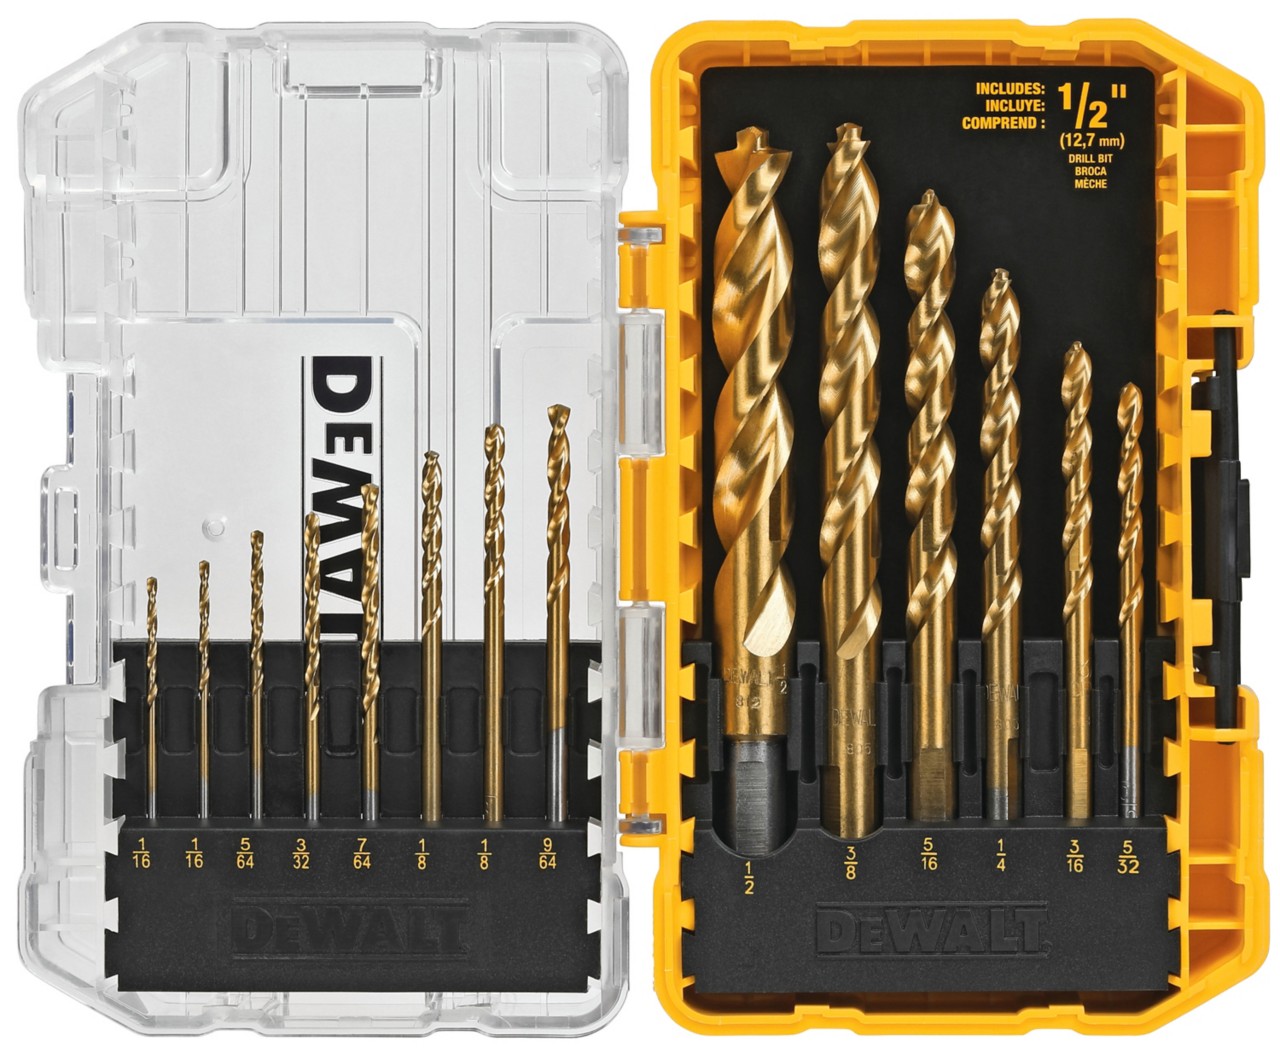 Image of drill set links to all drill bit sets catalog.